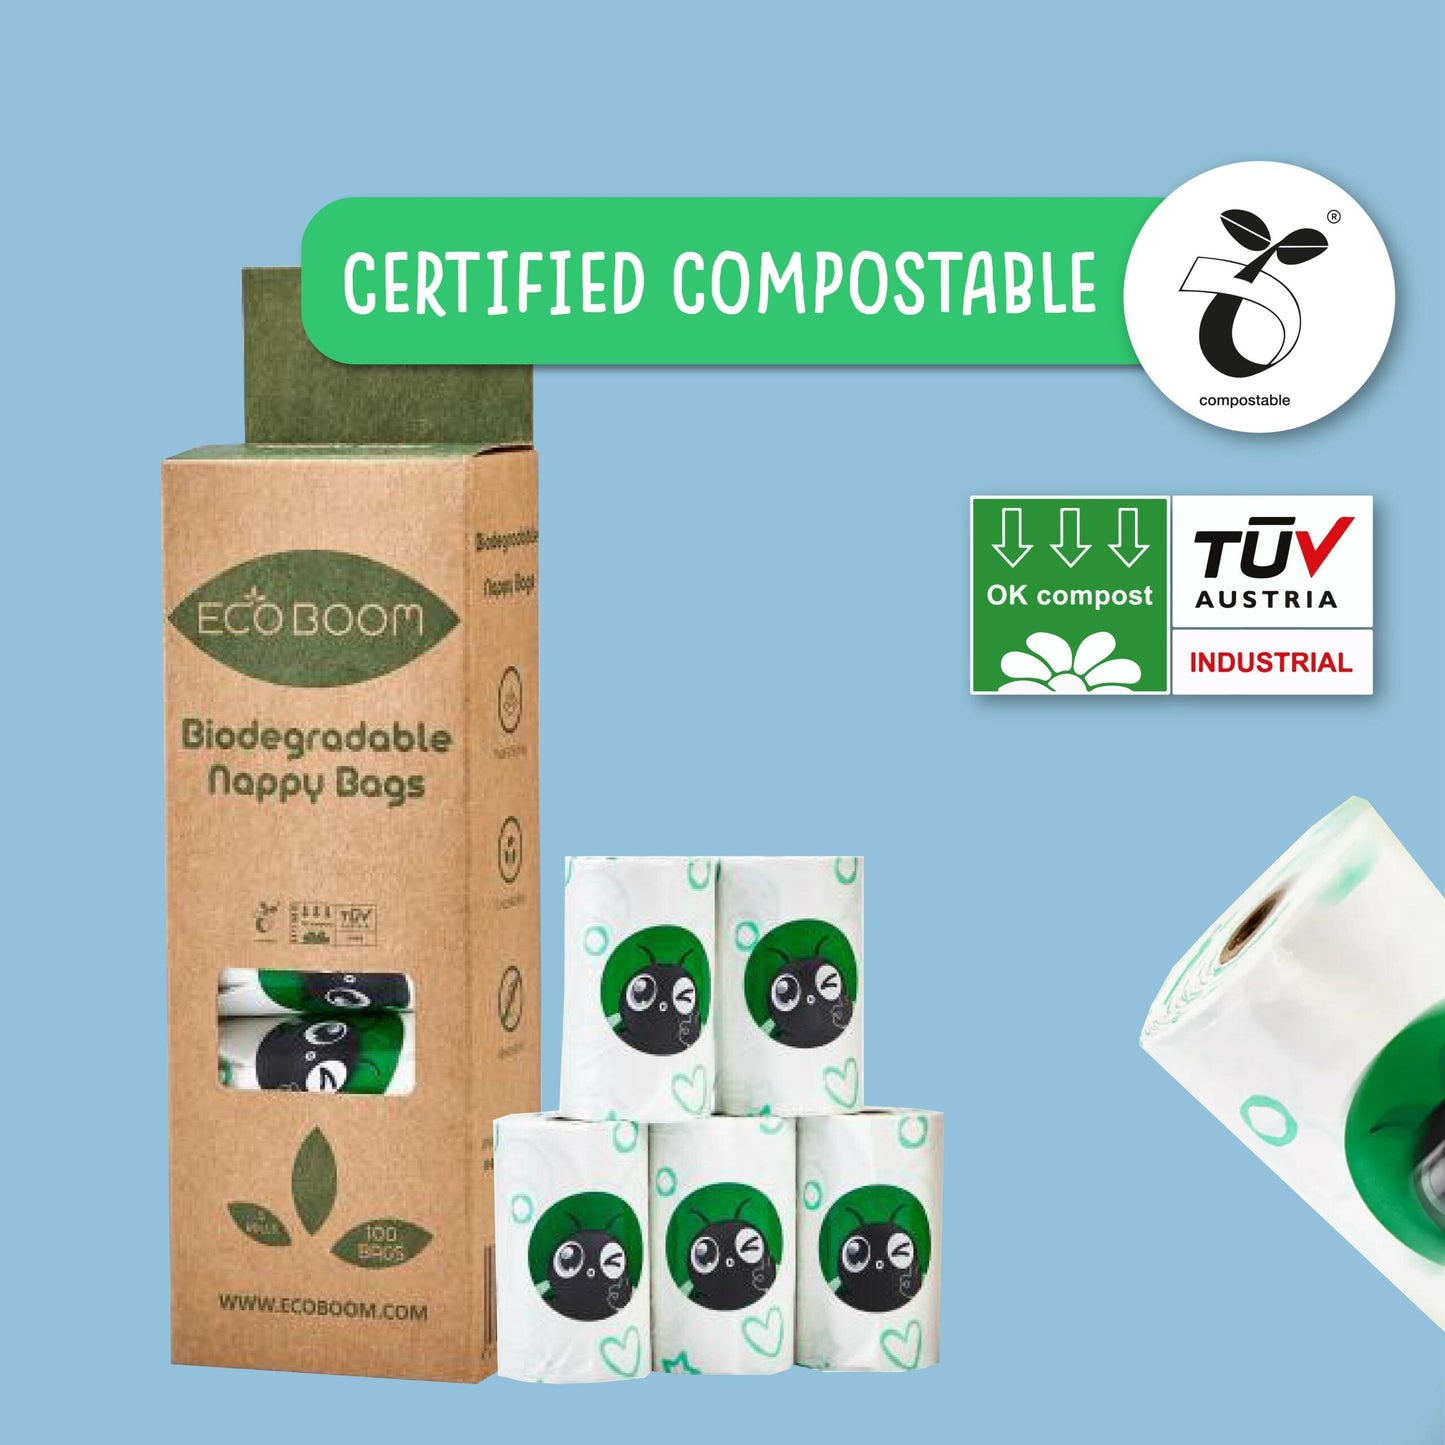 Eco Parenting Bundle- 2 Months Supply of Nappies, Nappy Bags and Baby Wipes (Medium) - Eco Green Living